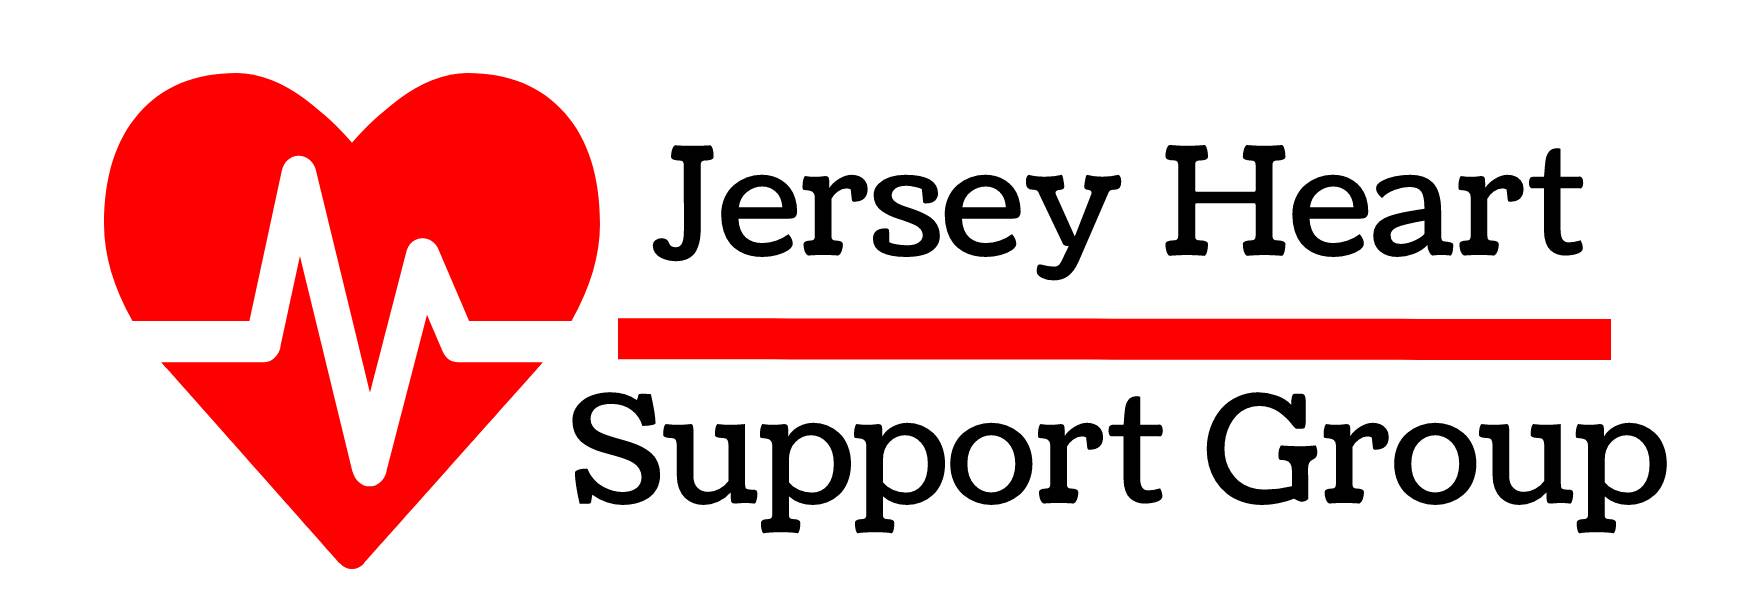 Jersey Heart Support Group